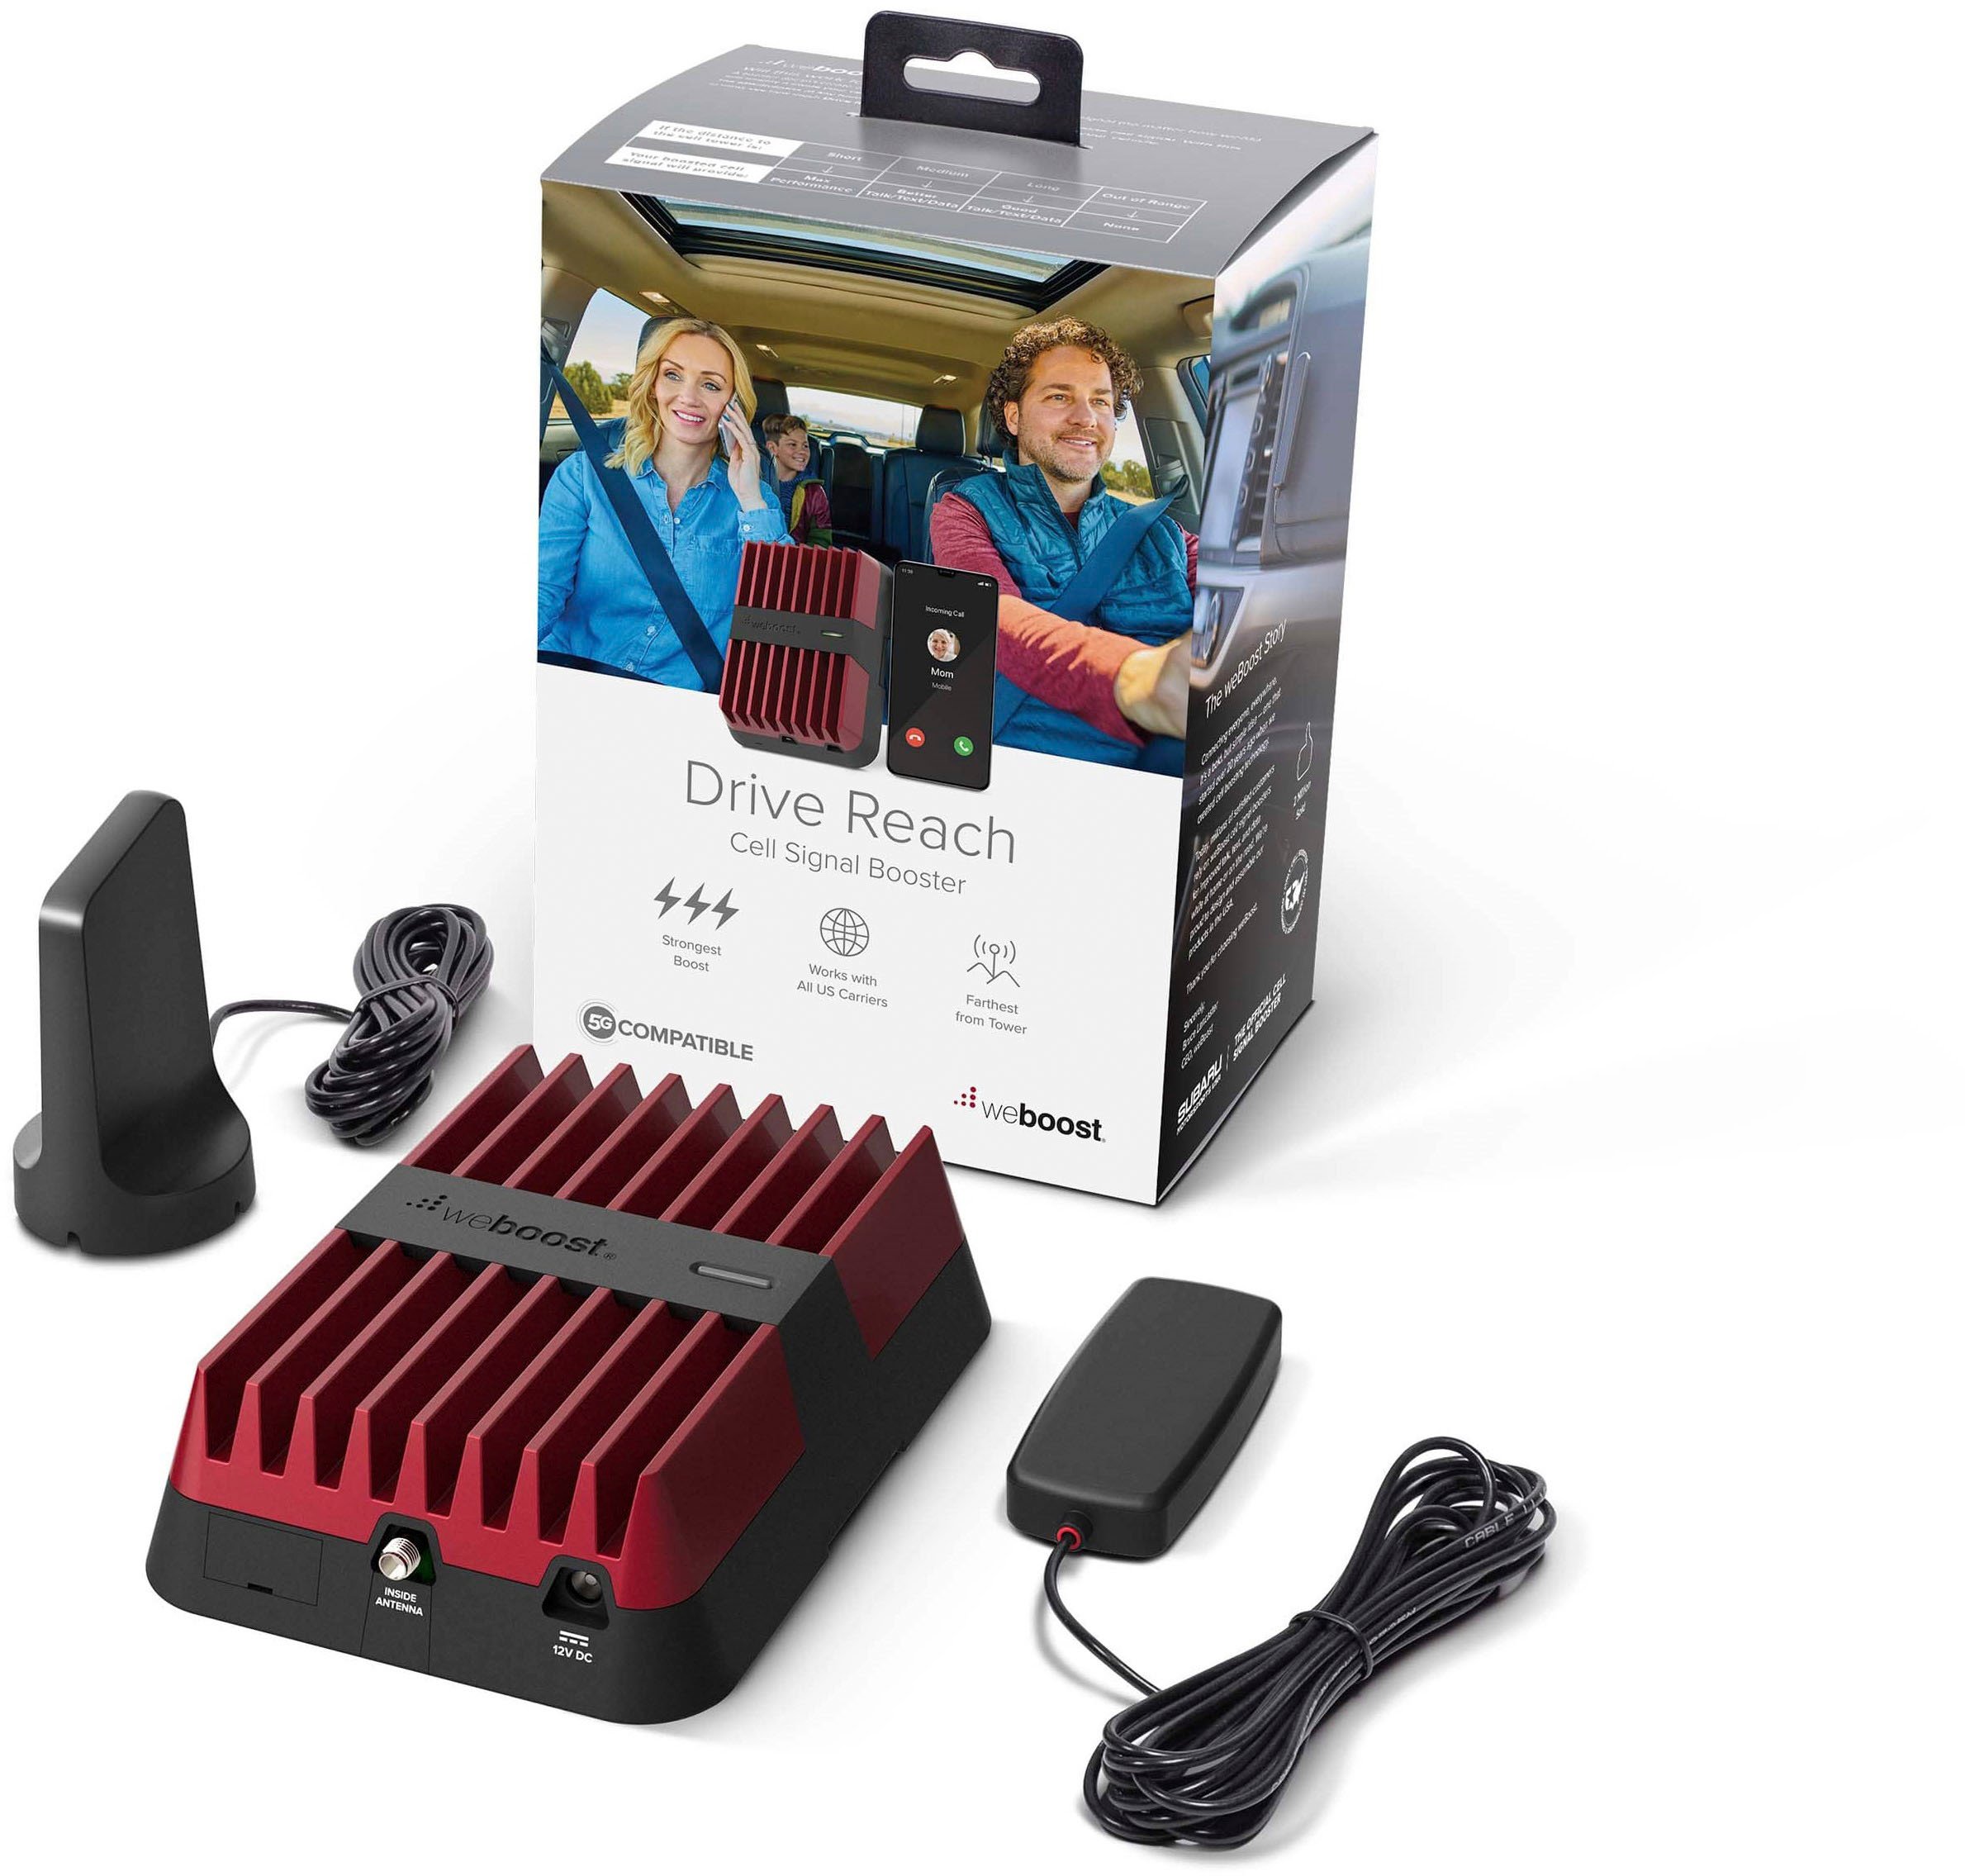 Angle View: weBoost - Drive Reach Vehicle Cell Phone Signal Booster Kit for Car, Truck, and SUV, Boosts 5G & 4G LTE for All U.S. Carriers - Red